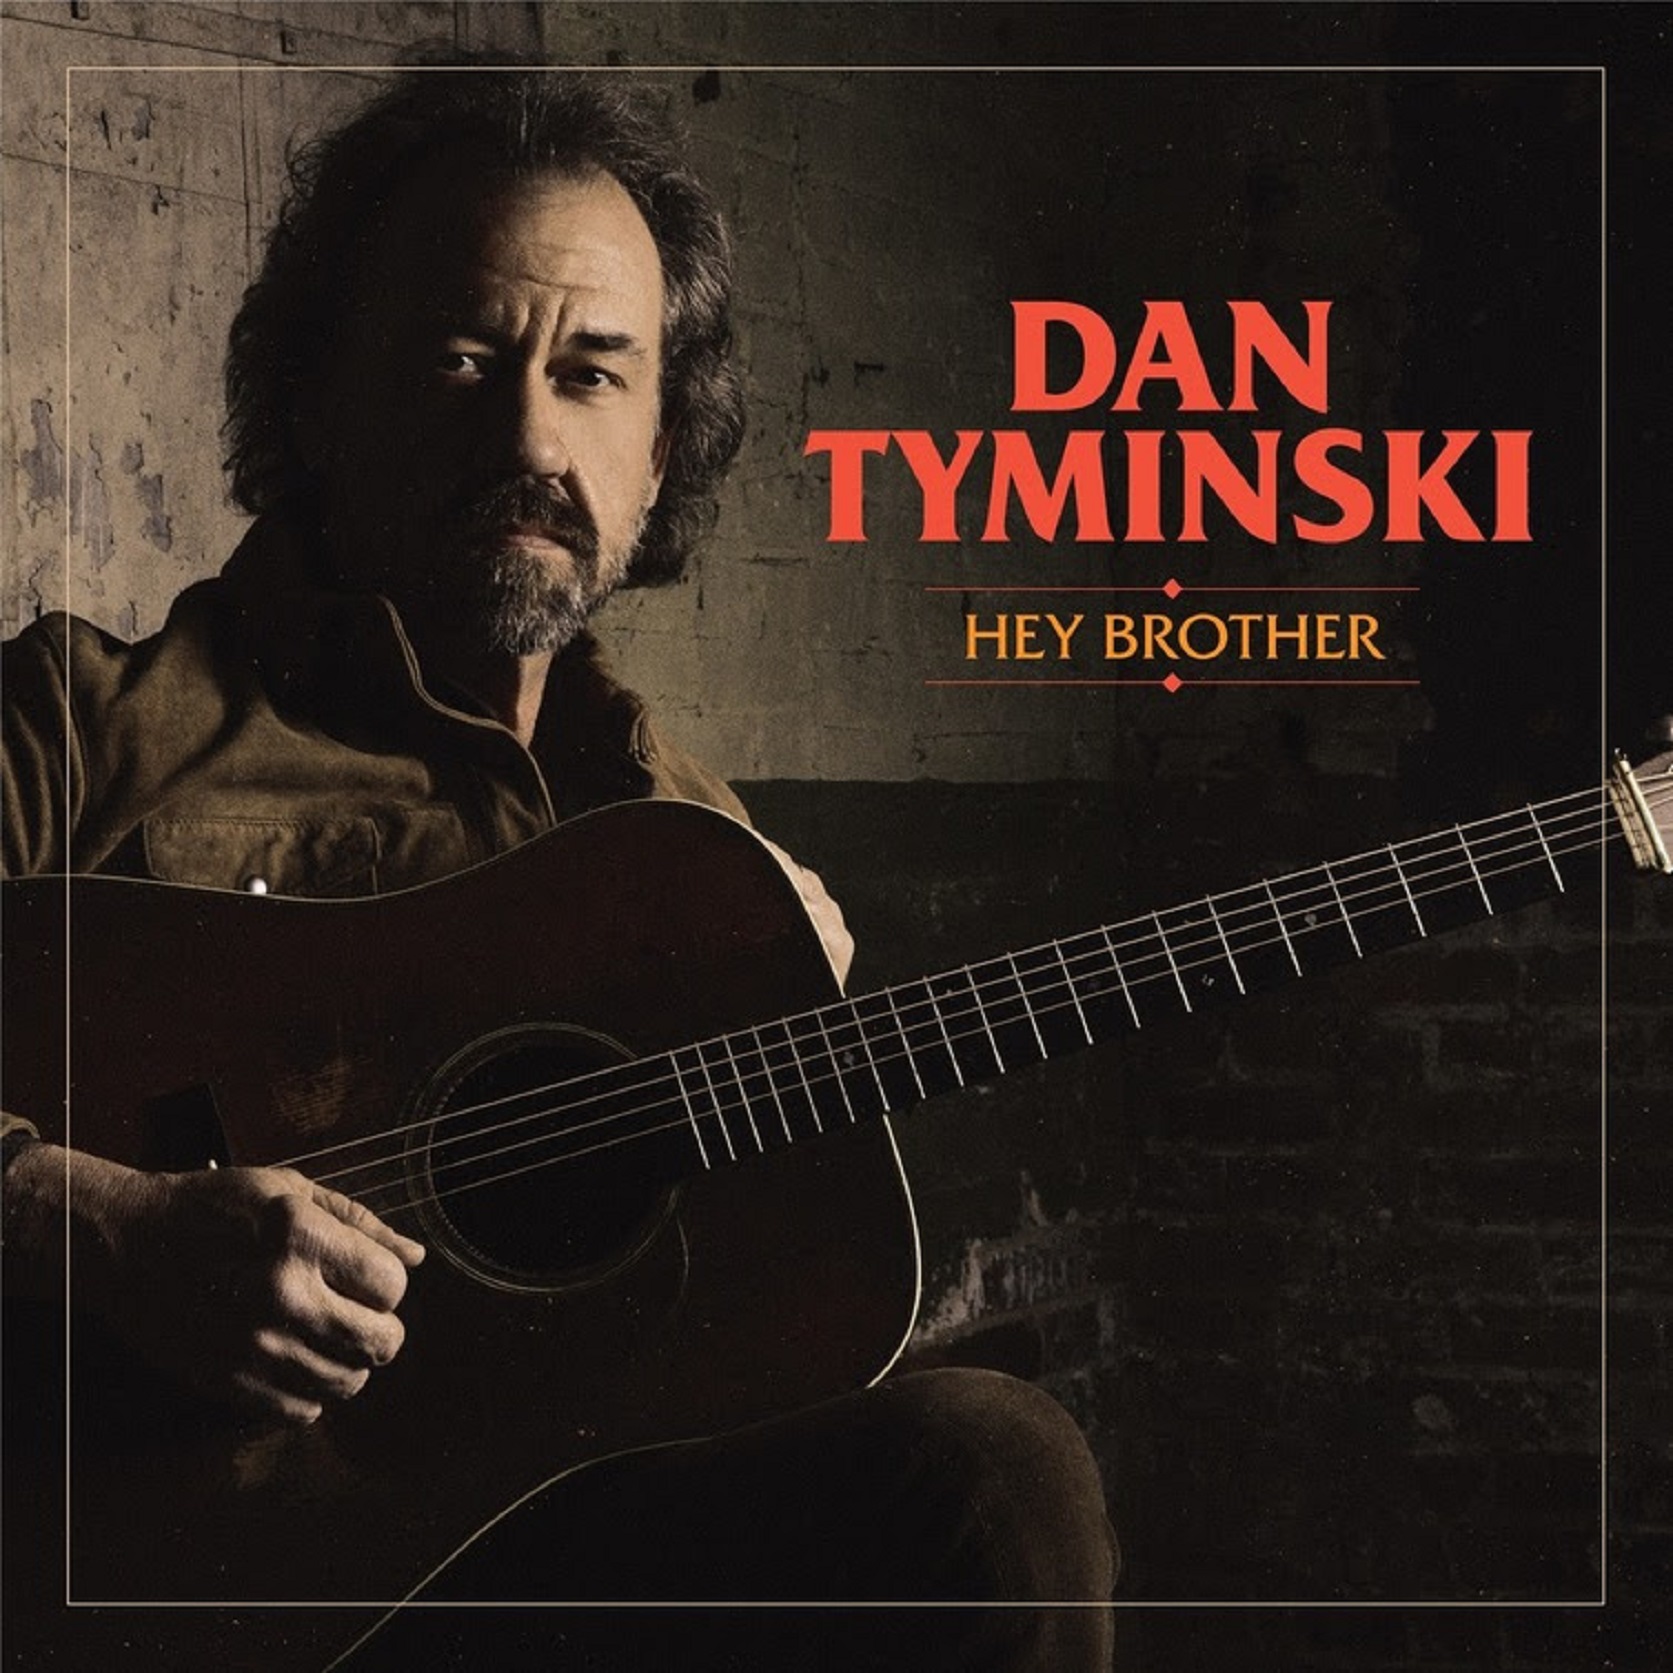 DAN TYMINSKI RELEASES NEW VERSION OF "HEY BROTHER" AHEAD OF UPCOMING ALBUM